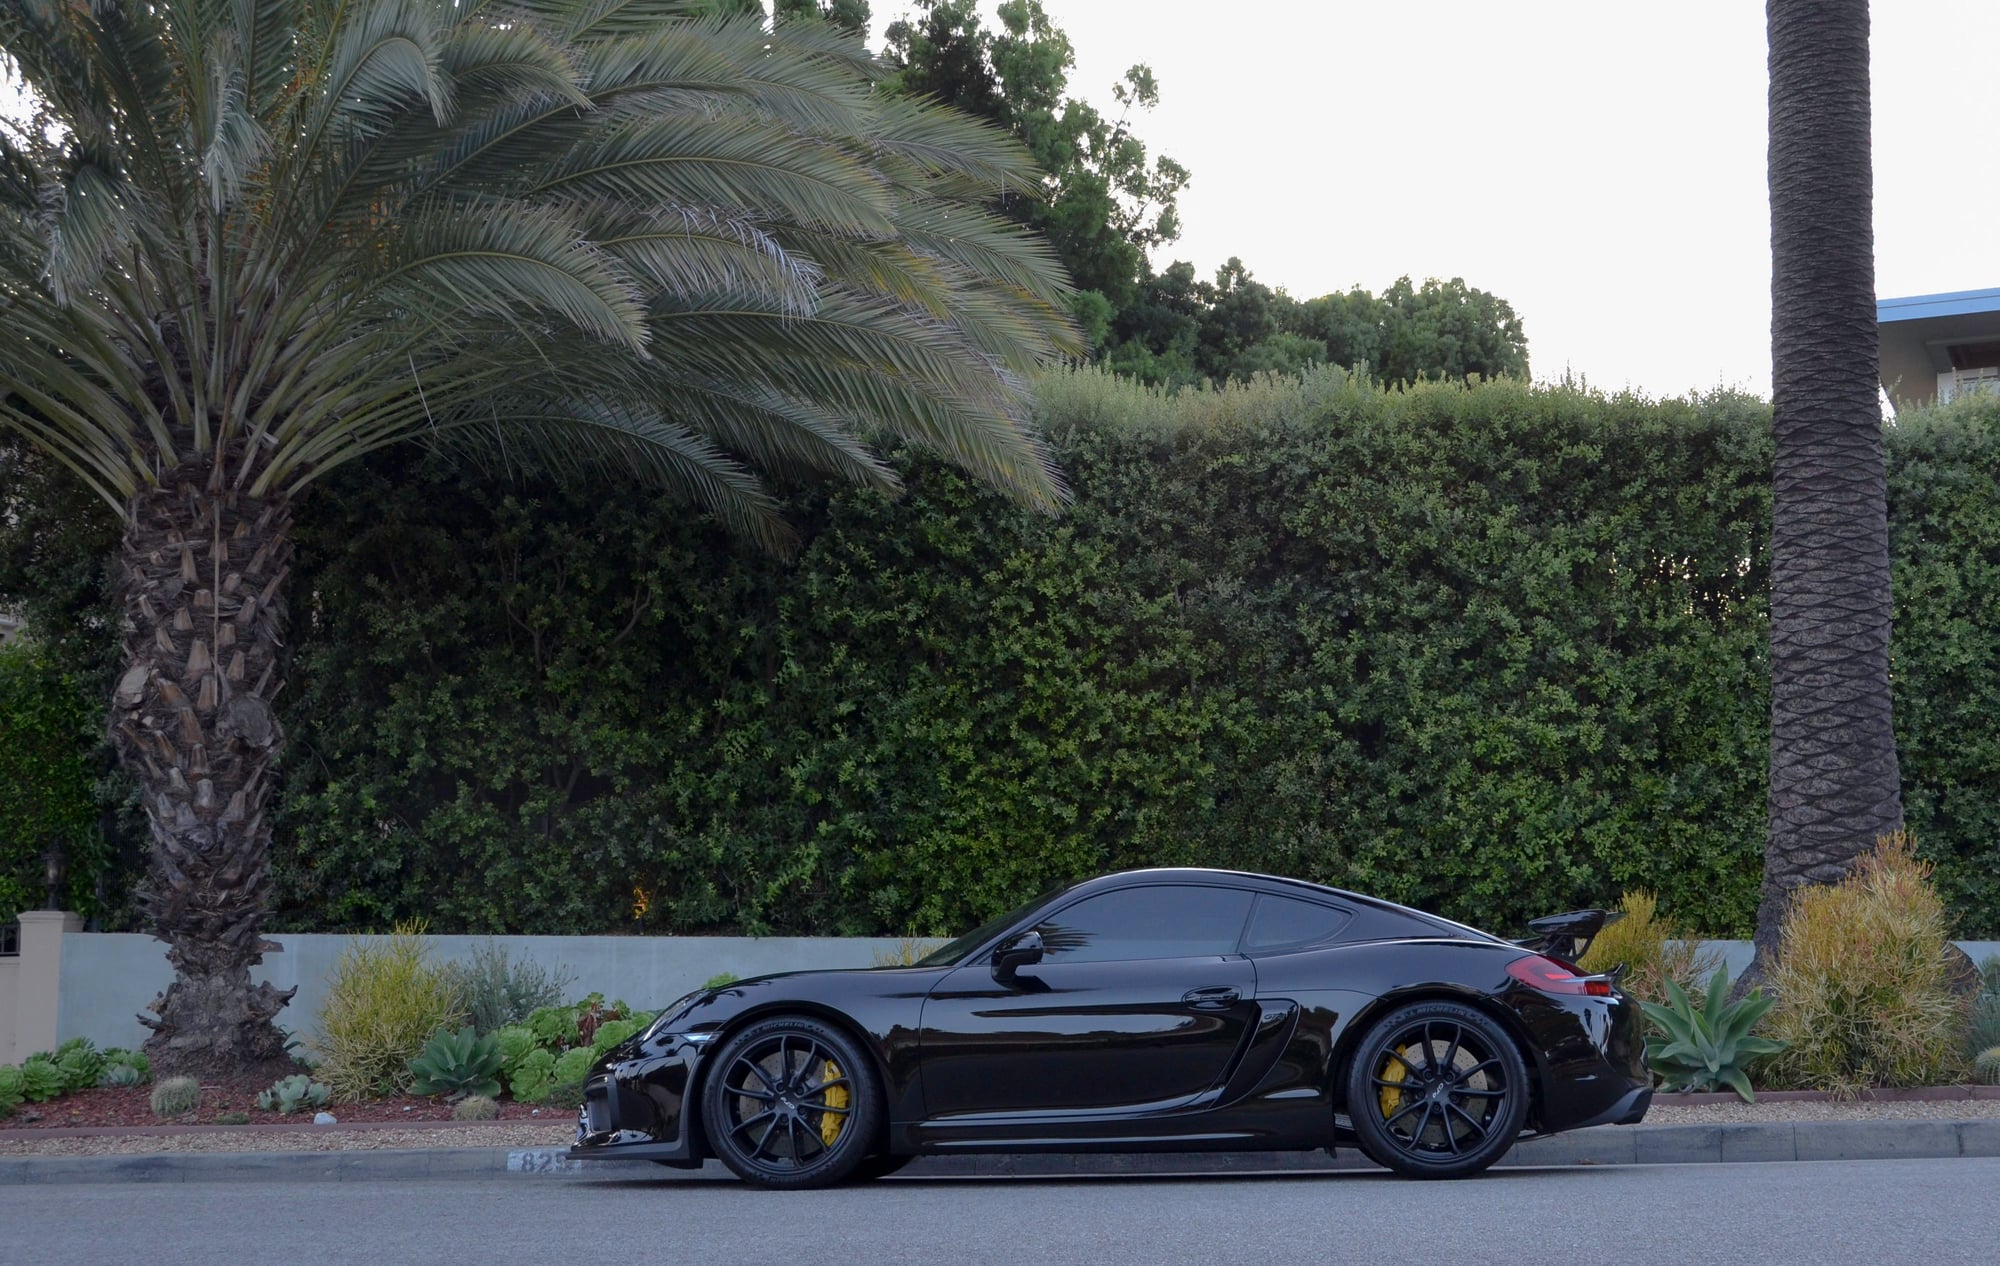 2016 Porsche Cayman GT4 - 2016 GT4, LWBS, PCCB, CPO priced to sell - Used - VIN WP0AC2A89GK191654 - 4,500 Miles - 6 cyl - 2WD - Manual - Coupe - Black - Los Angeles, CA 90067, United States